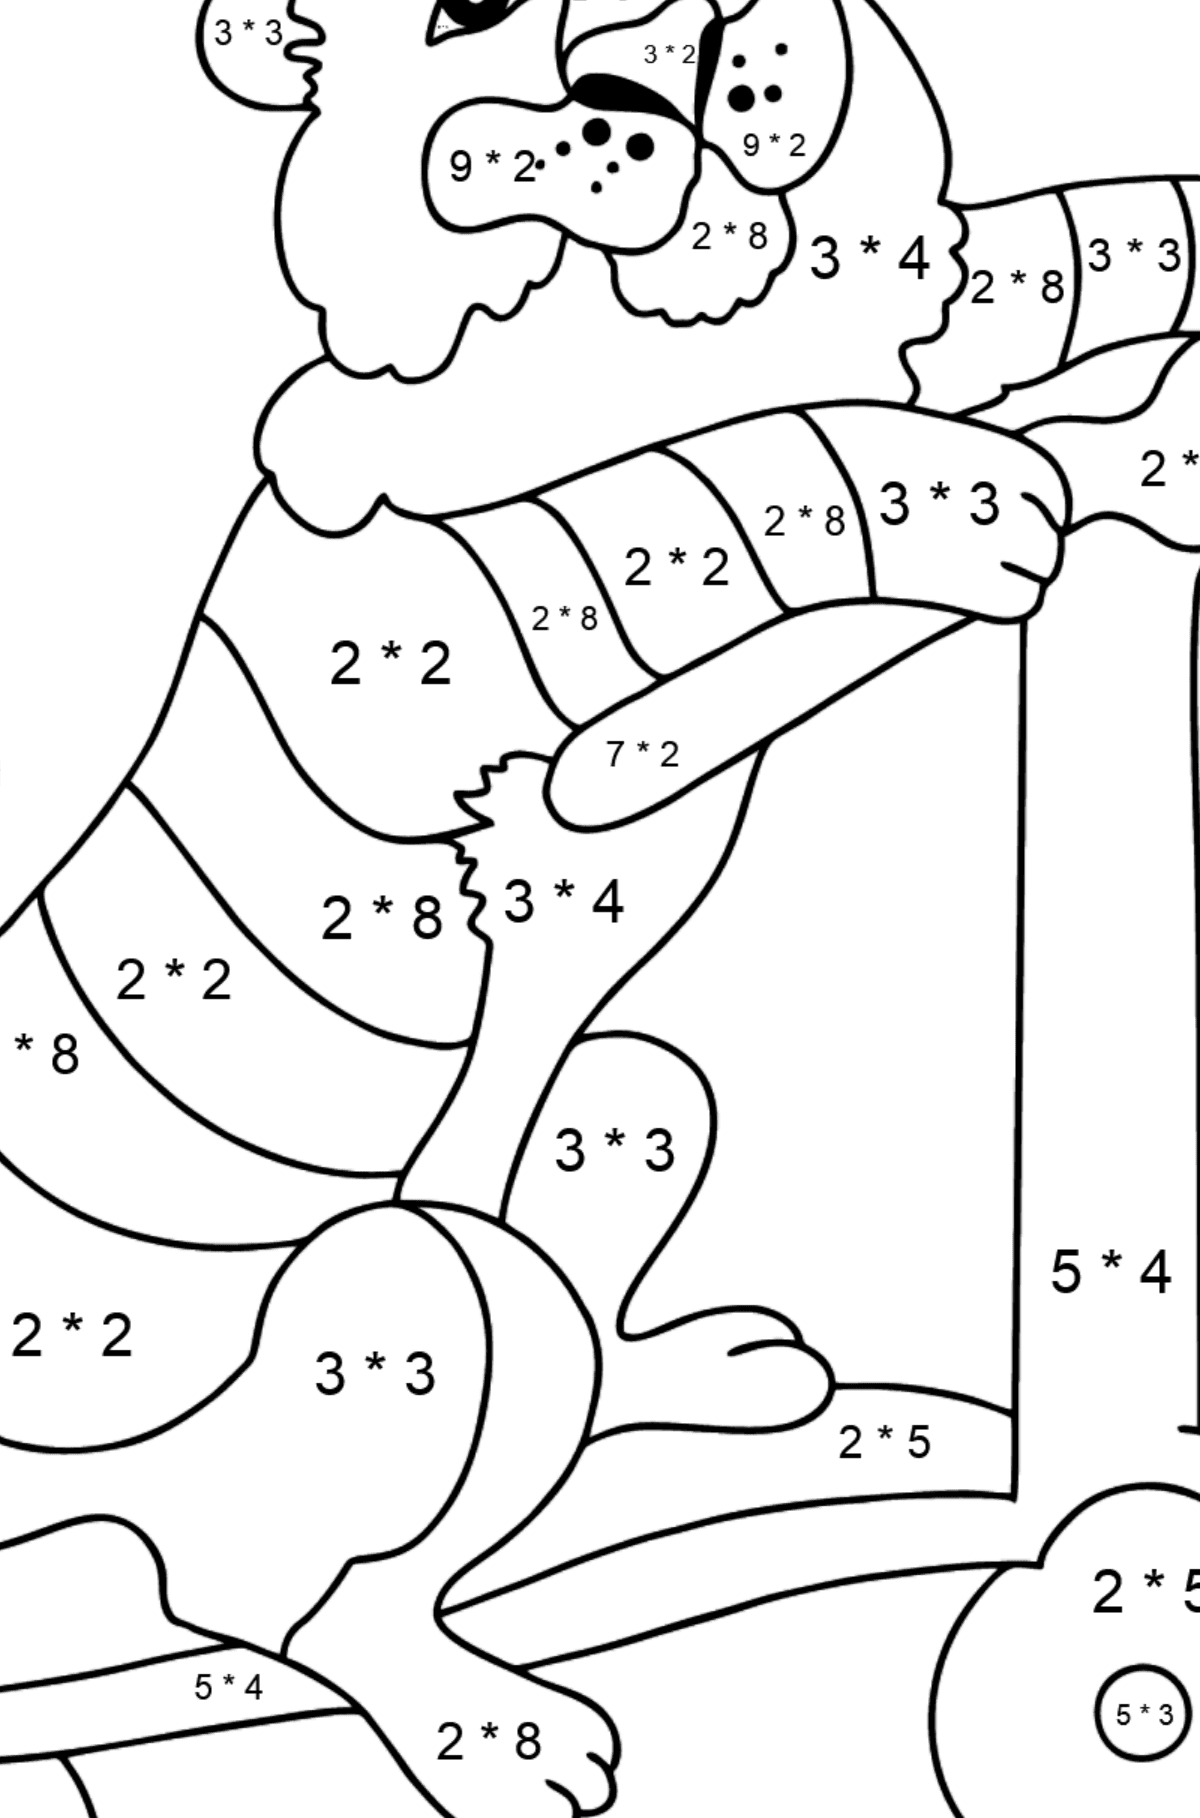 Coloring Page - A Tiger on a Fancy Scooter - Math Coloring - Multiplication for Kids